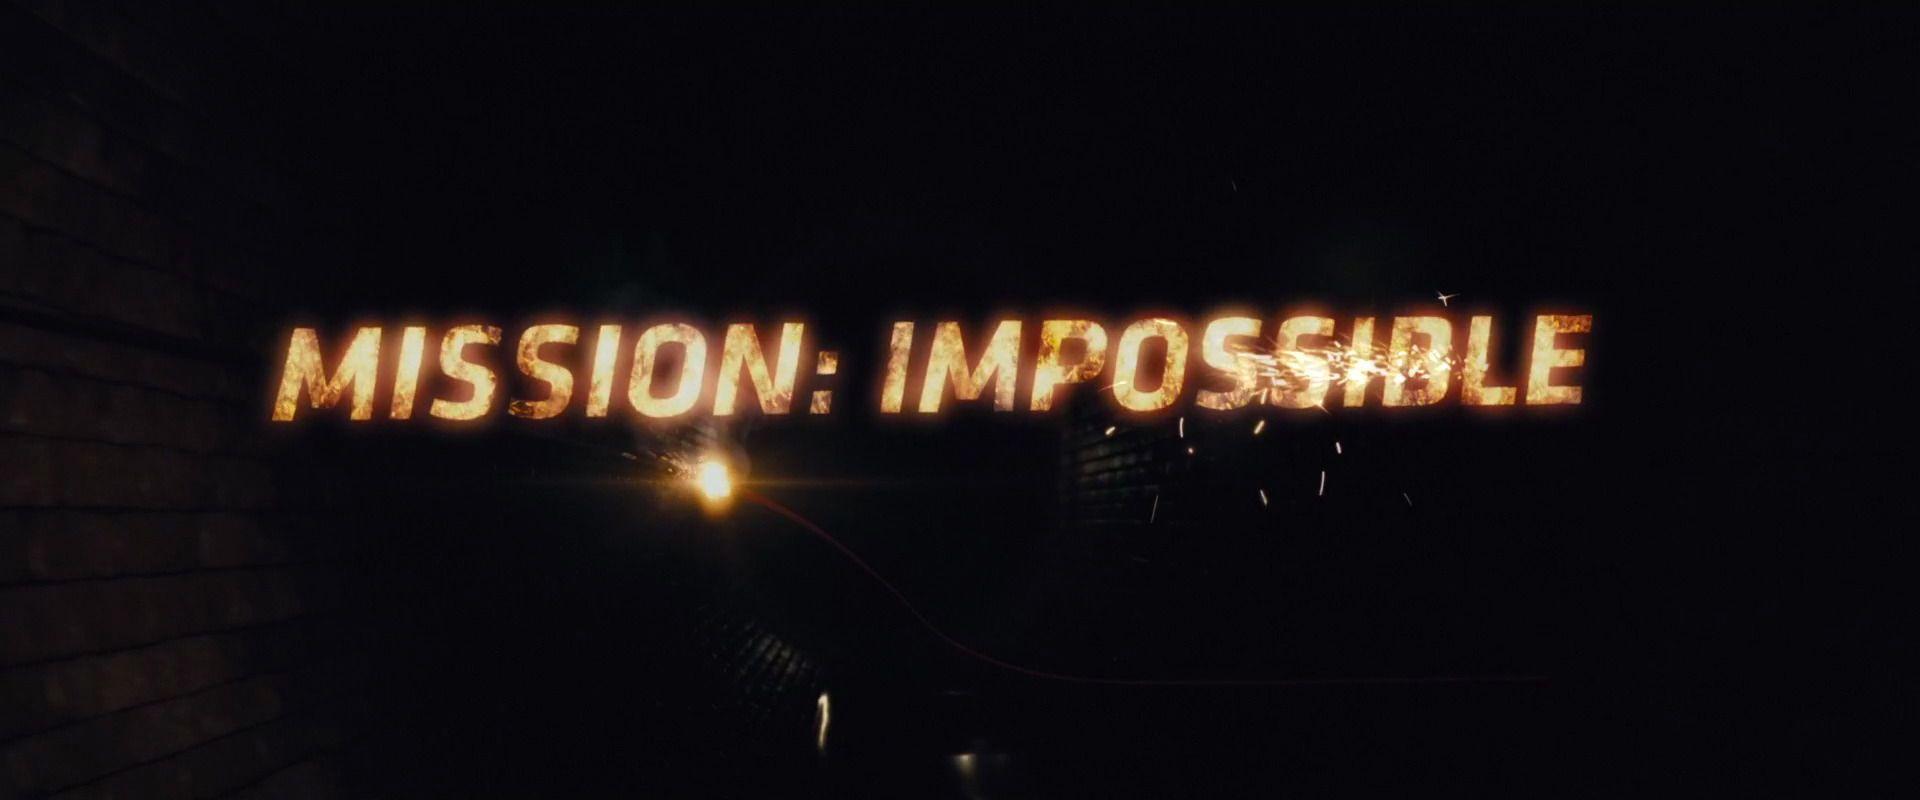 Inpossible Logo - Image - Mission - Impossible Logo (GP).jpg | Film and Television ...